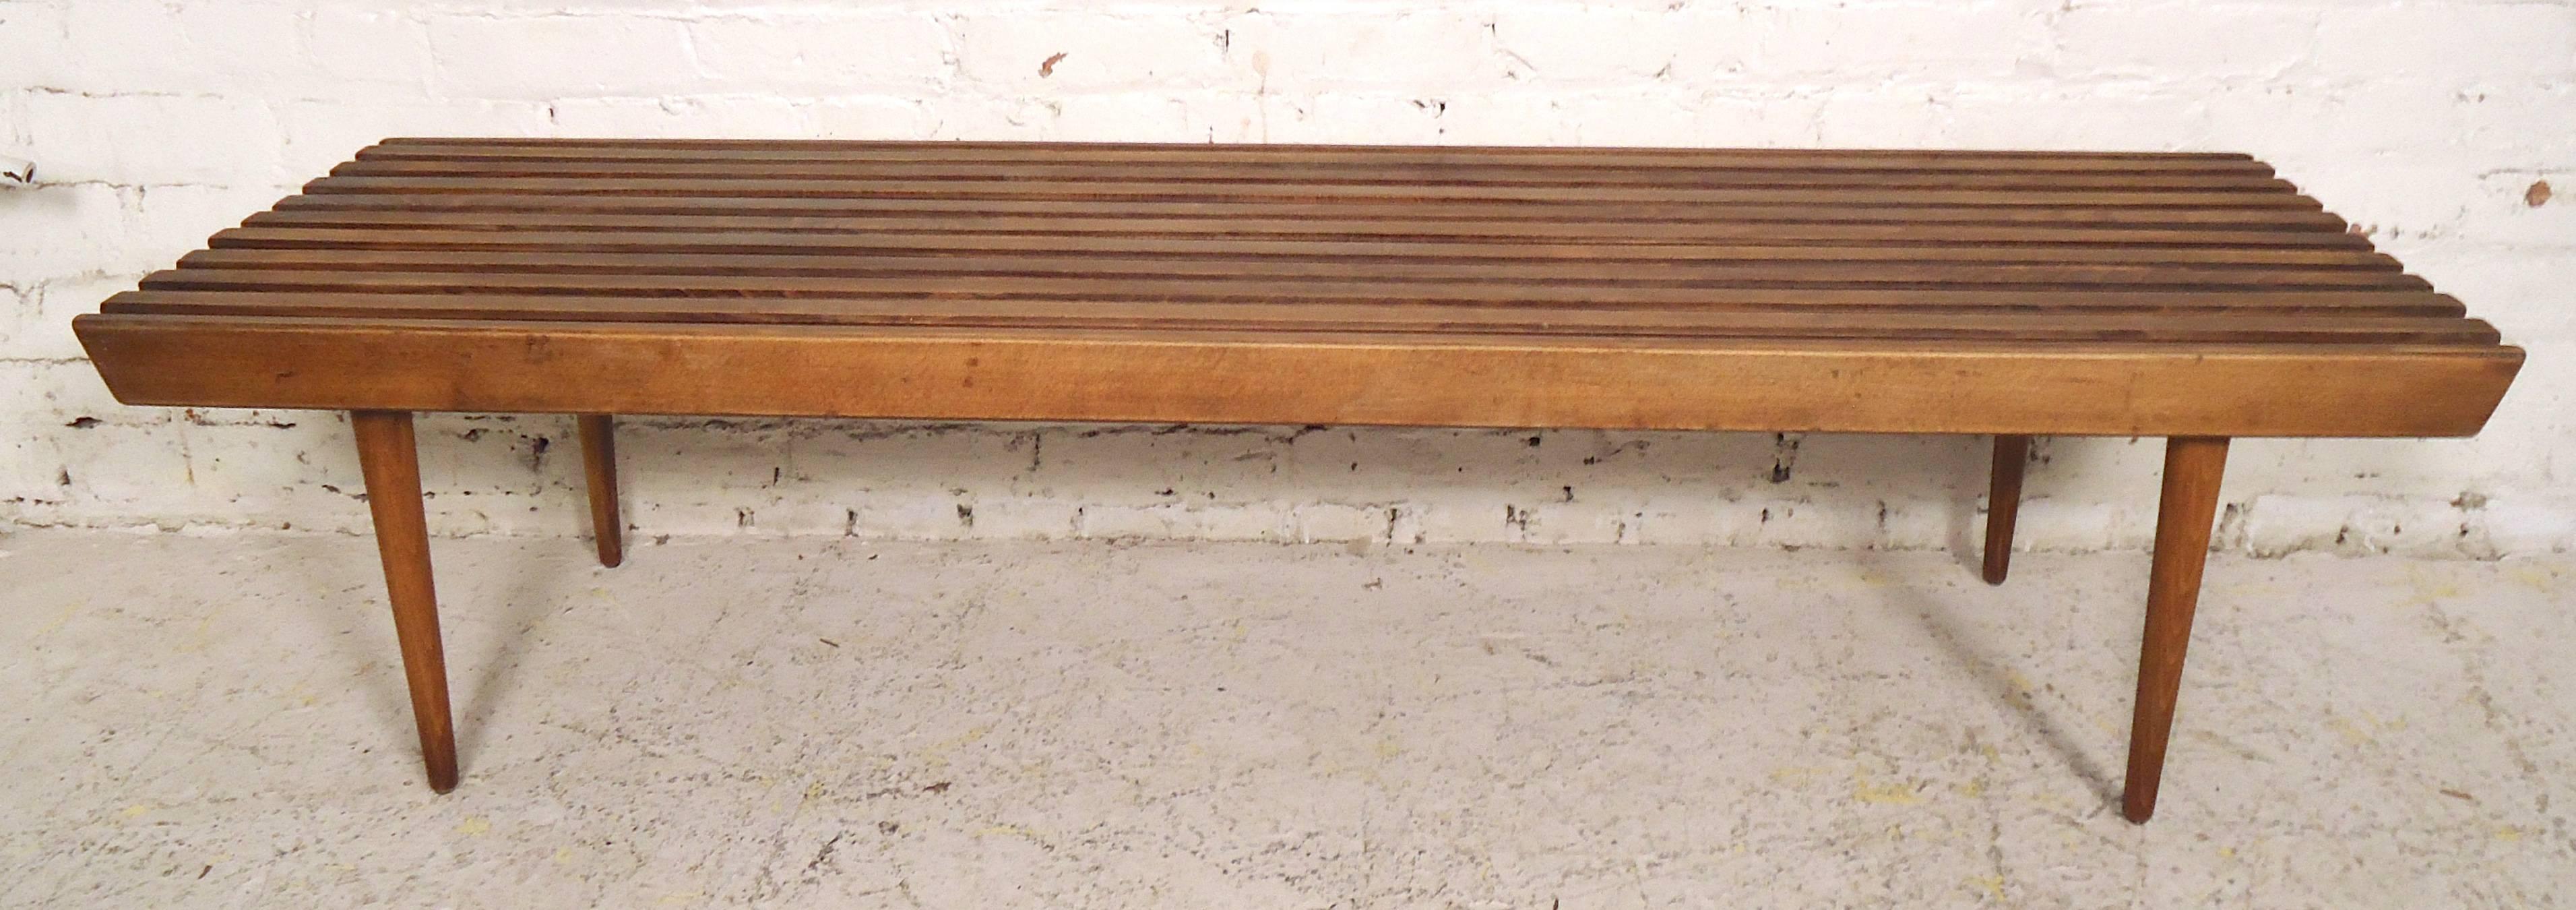 Attractive slat bench/table with walnut grain and tapered legs. Great for living room, entry way or as a bedside bench.

(Please confirm item location - NY or NJ - with dealer).
 